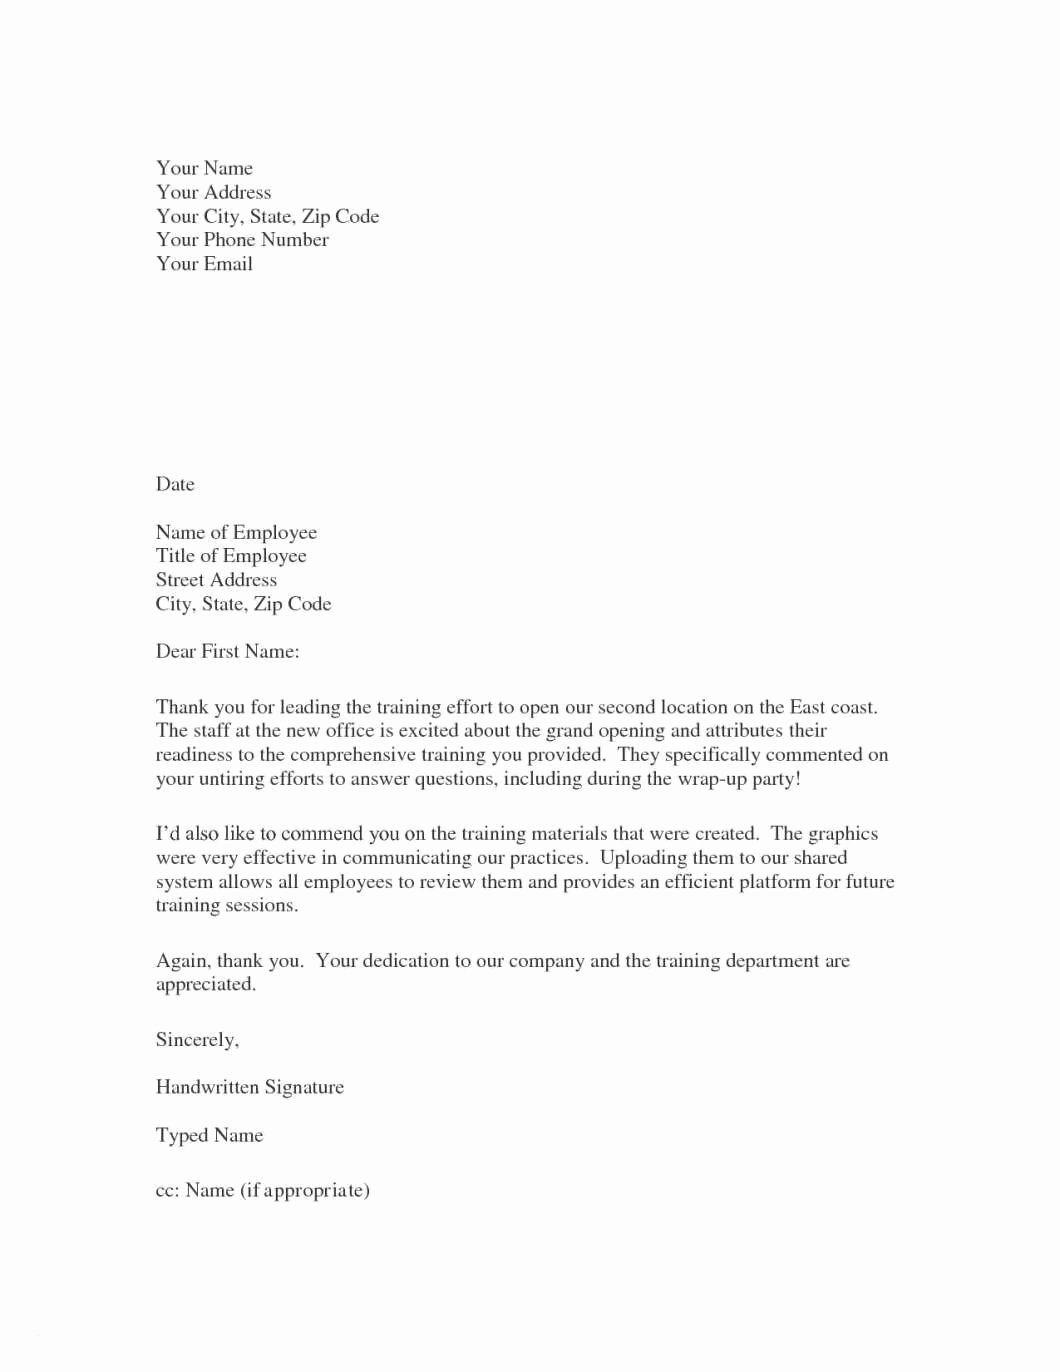 Letter Of Appreciation Templates New 9 10 Sample Appreciation Letters to Employees